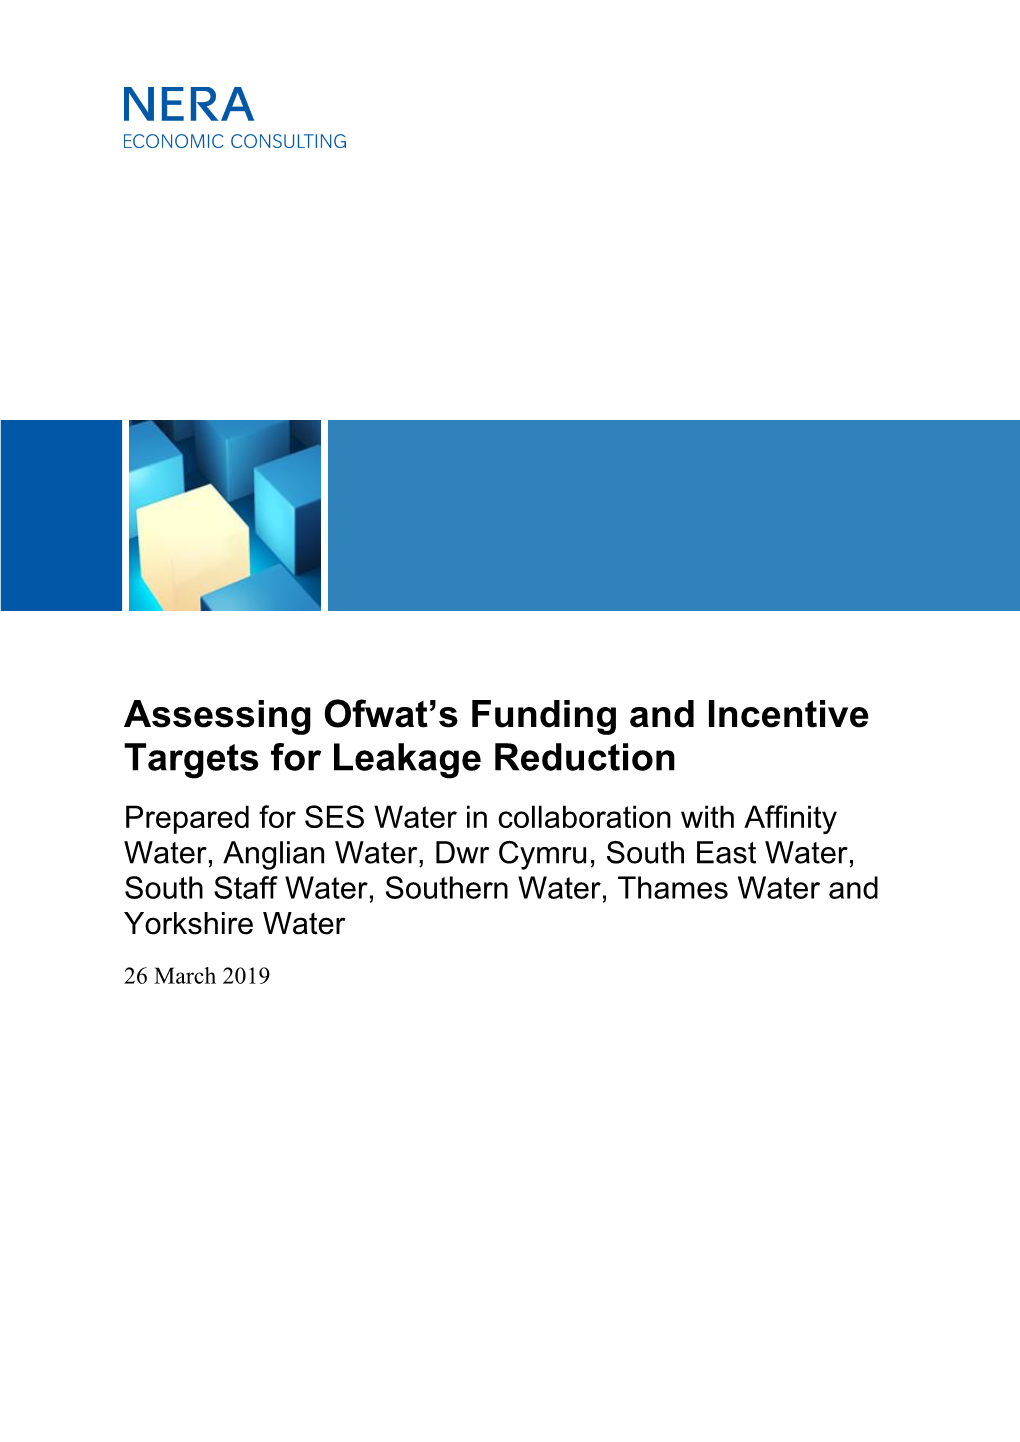 Assessing Ofwat's Funding and Incentive Targets